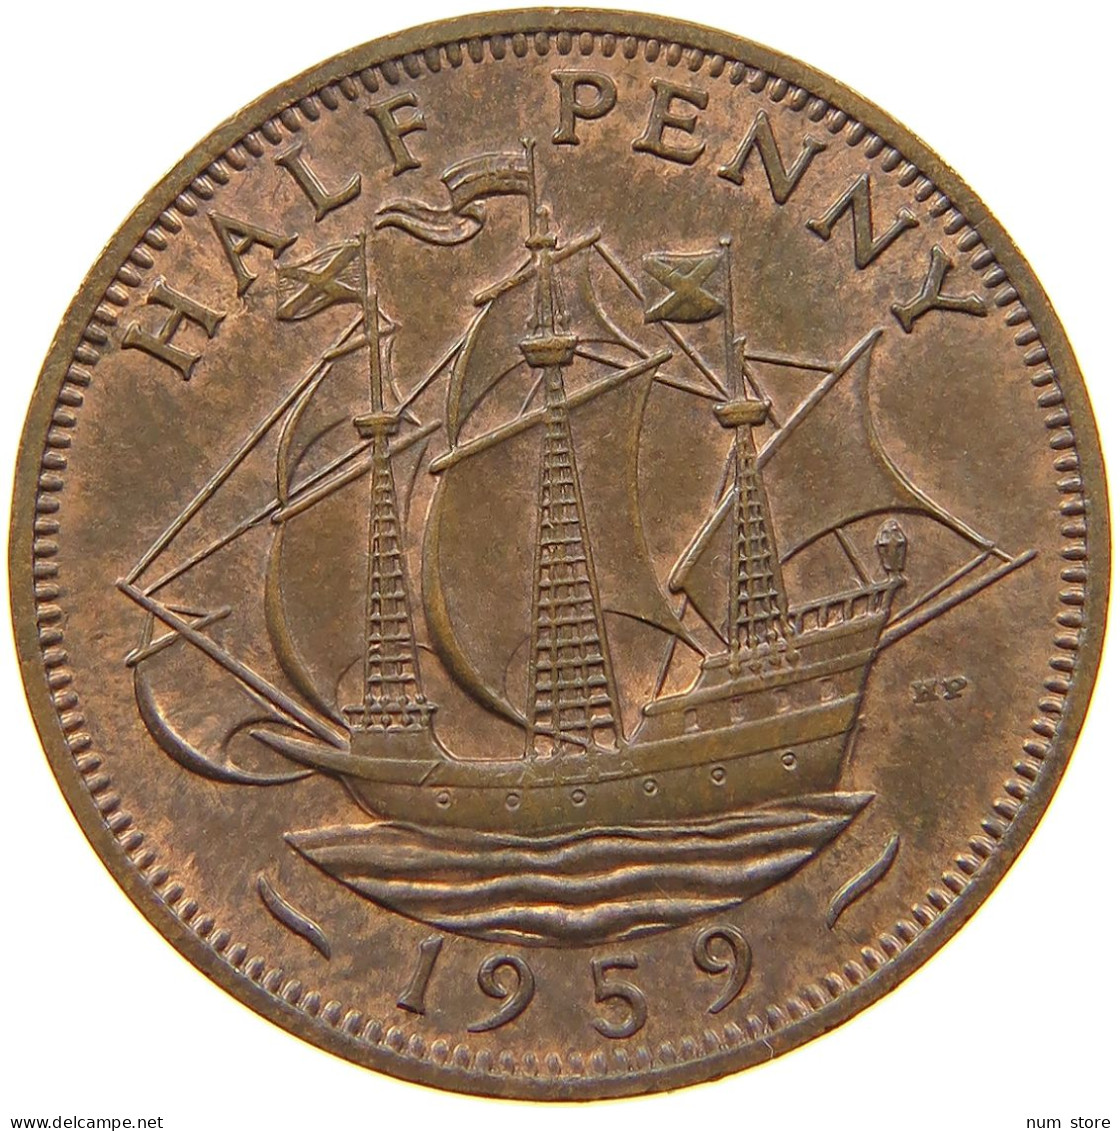 GREAT BRITAIN HALFPENNY 1959 TOP #a011 0371 - C. 1/2 Penny